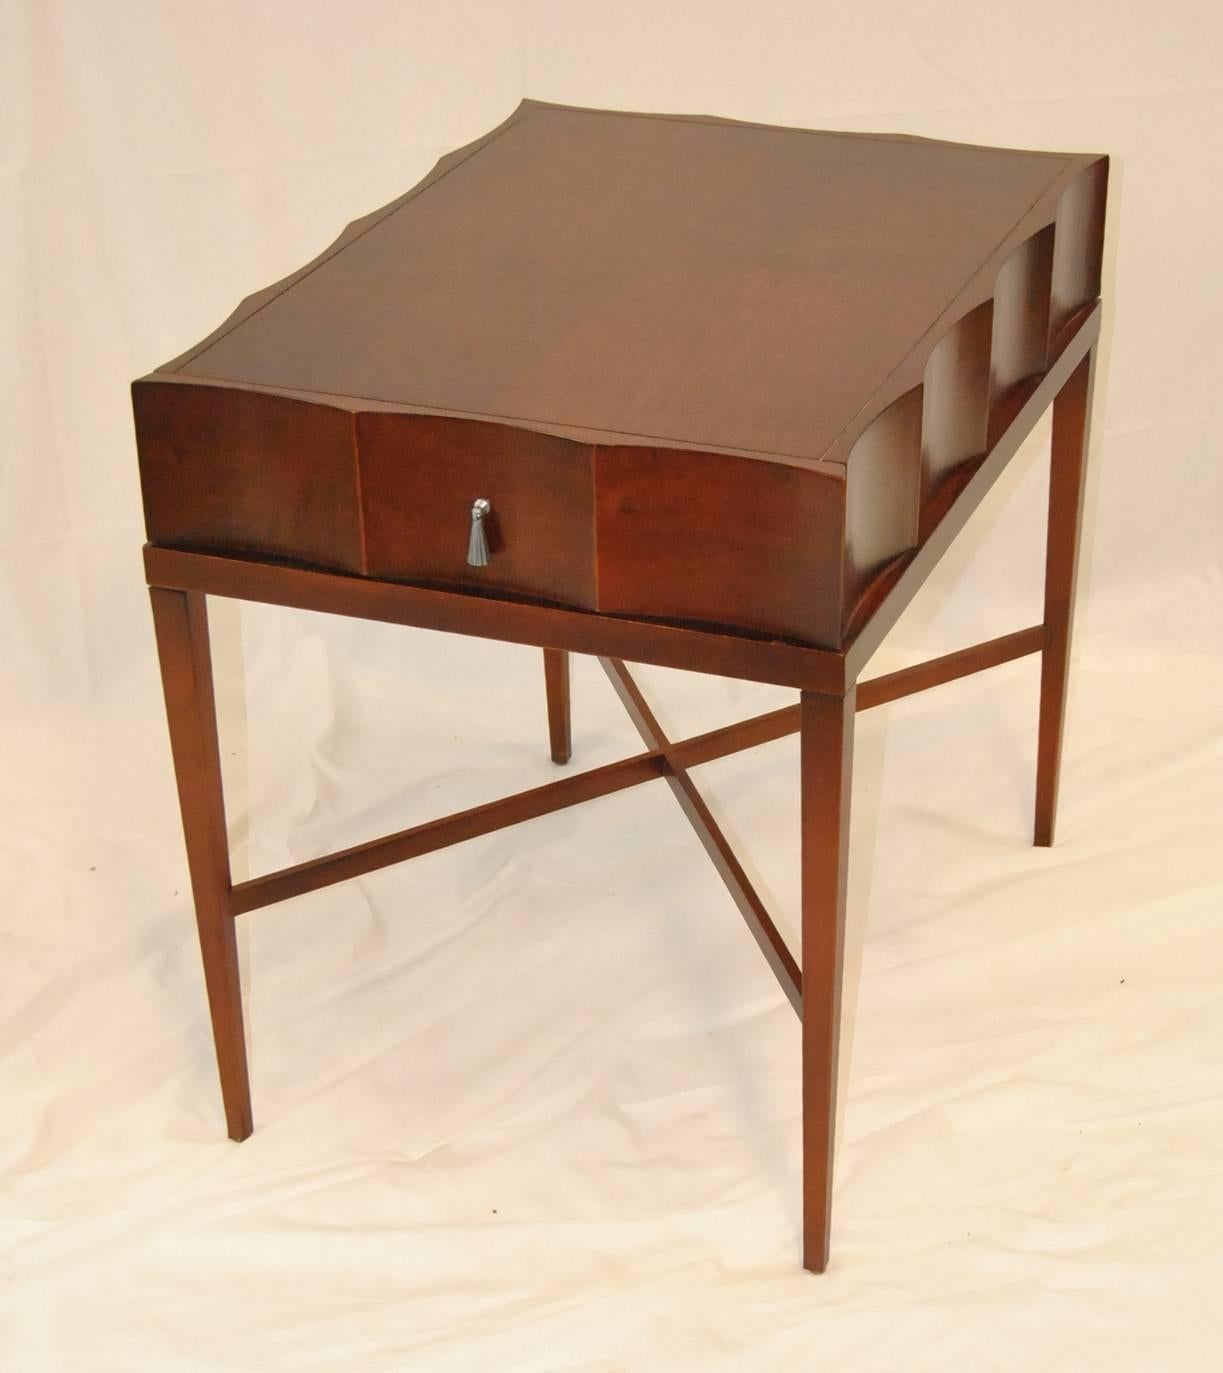 A unique mahogany side table by Baker Furniture. The small-scale table is big on style. The top is scalloped and features a front drawer with pewter pull. Top sits on four tapered legs with stretchers which not only provide a design feature but add